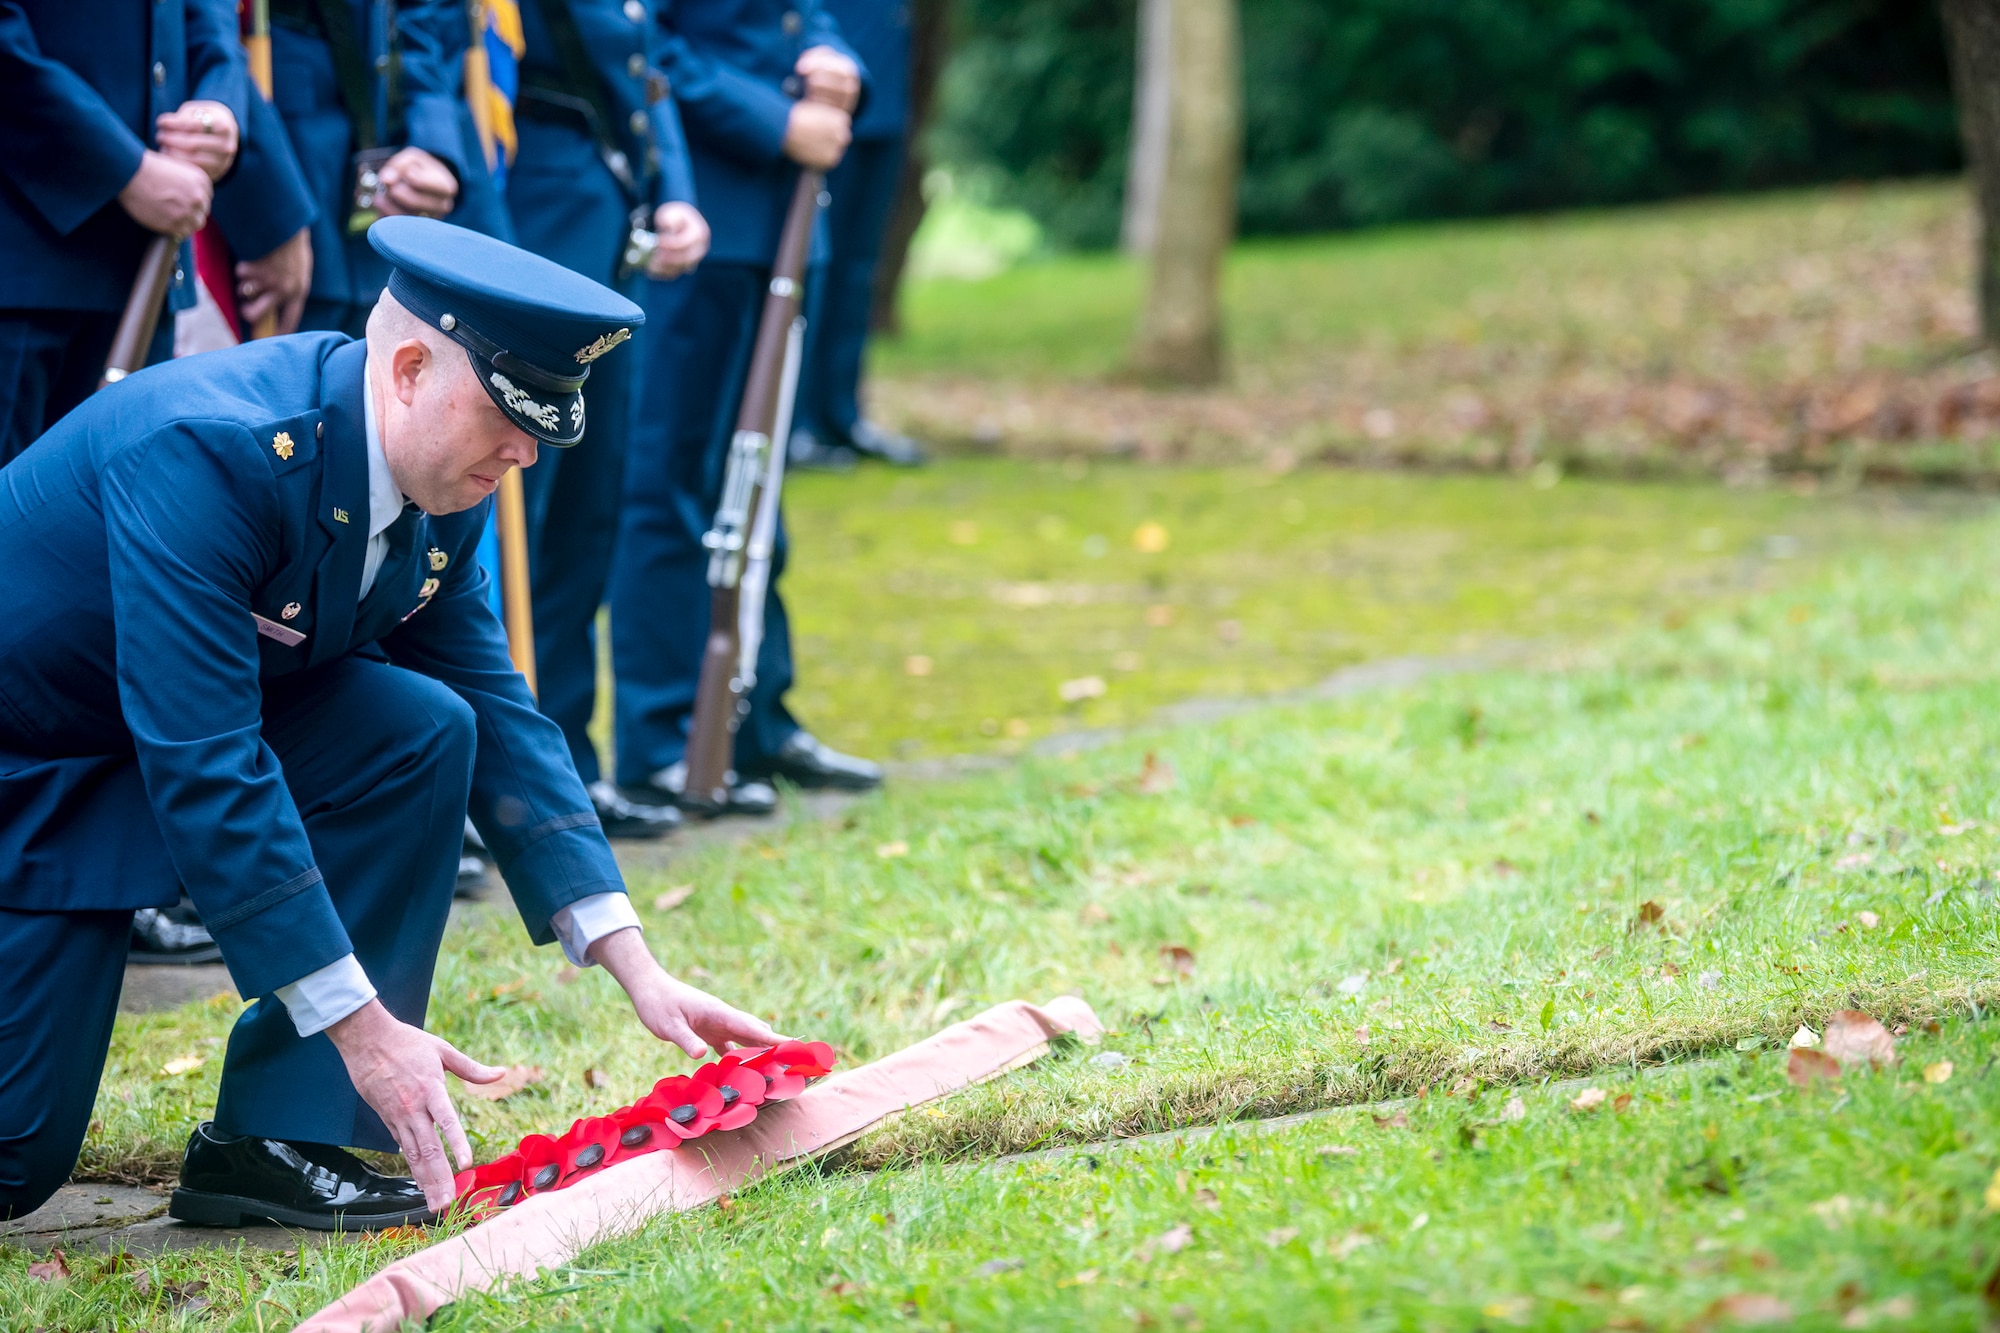 U.S. Air Force Maj. Preston Smith, 420th Munitions Squadron commander, lays a wreath during a Remembrance Day Ceremony at RAF Welford, England, Nov. 10, 2022. Airmen from the 501st Combat Support Wing, Royal Air Force, and distinguished guests came together to honor the sacrifices of armed forces veterans, past and present. (U.S. Air Force photo by Staff Sgt. Eugene Oliver)